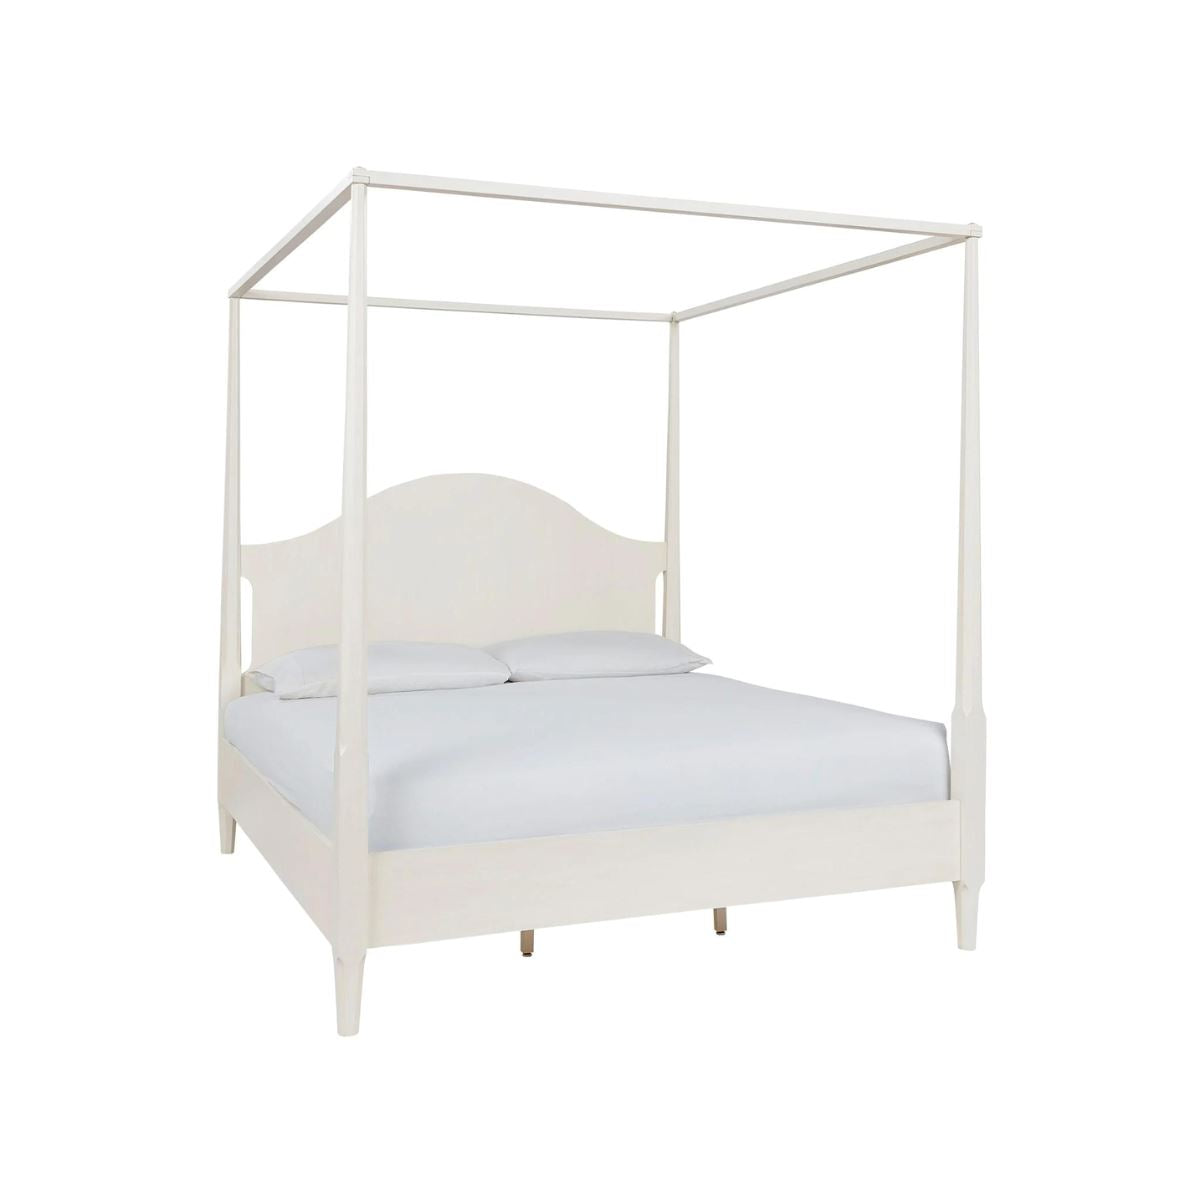 Madison Bed Frame - Queen. Front view.